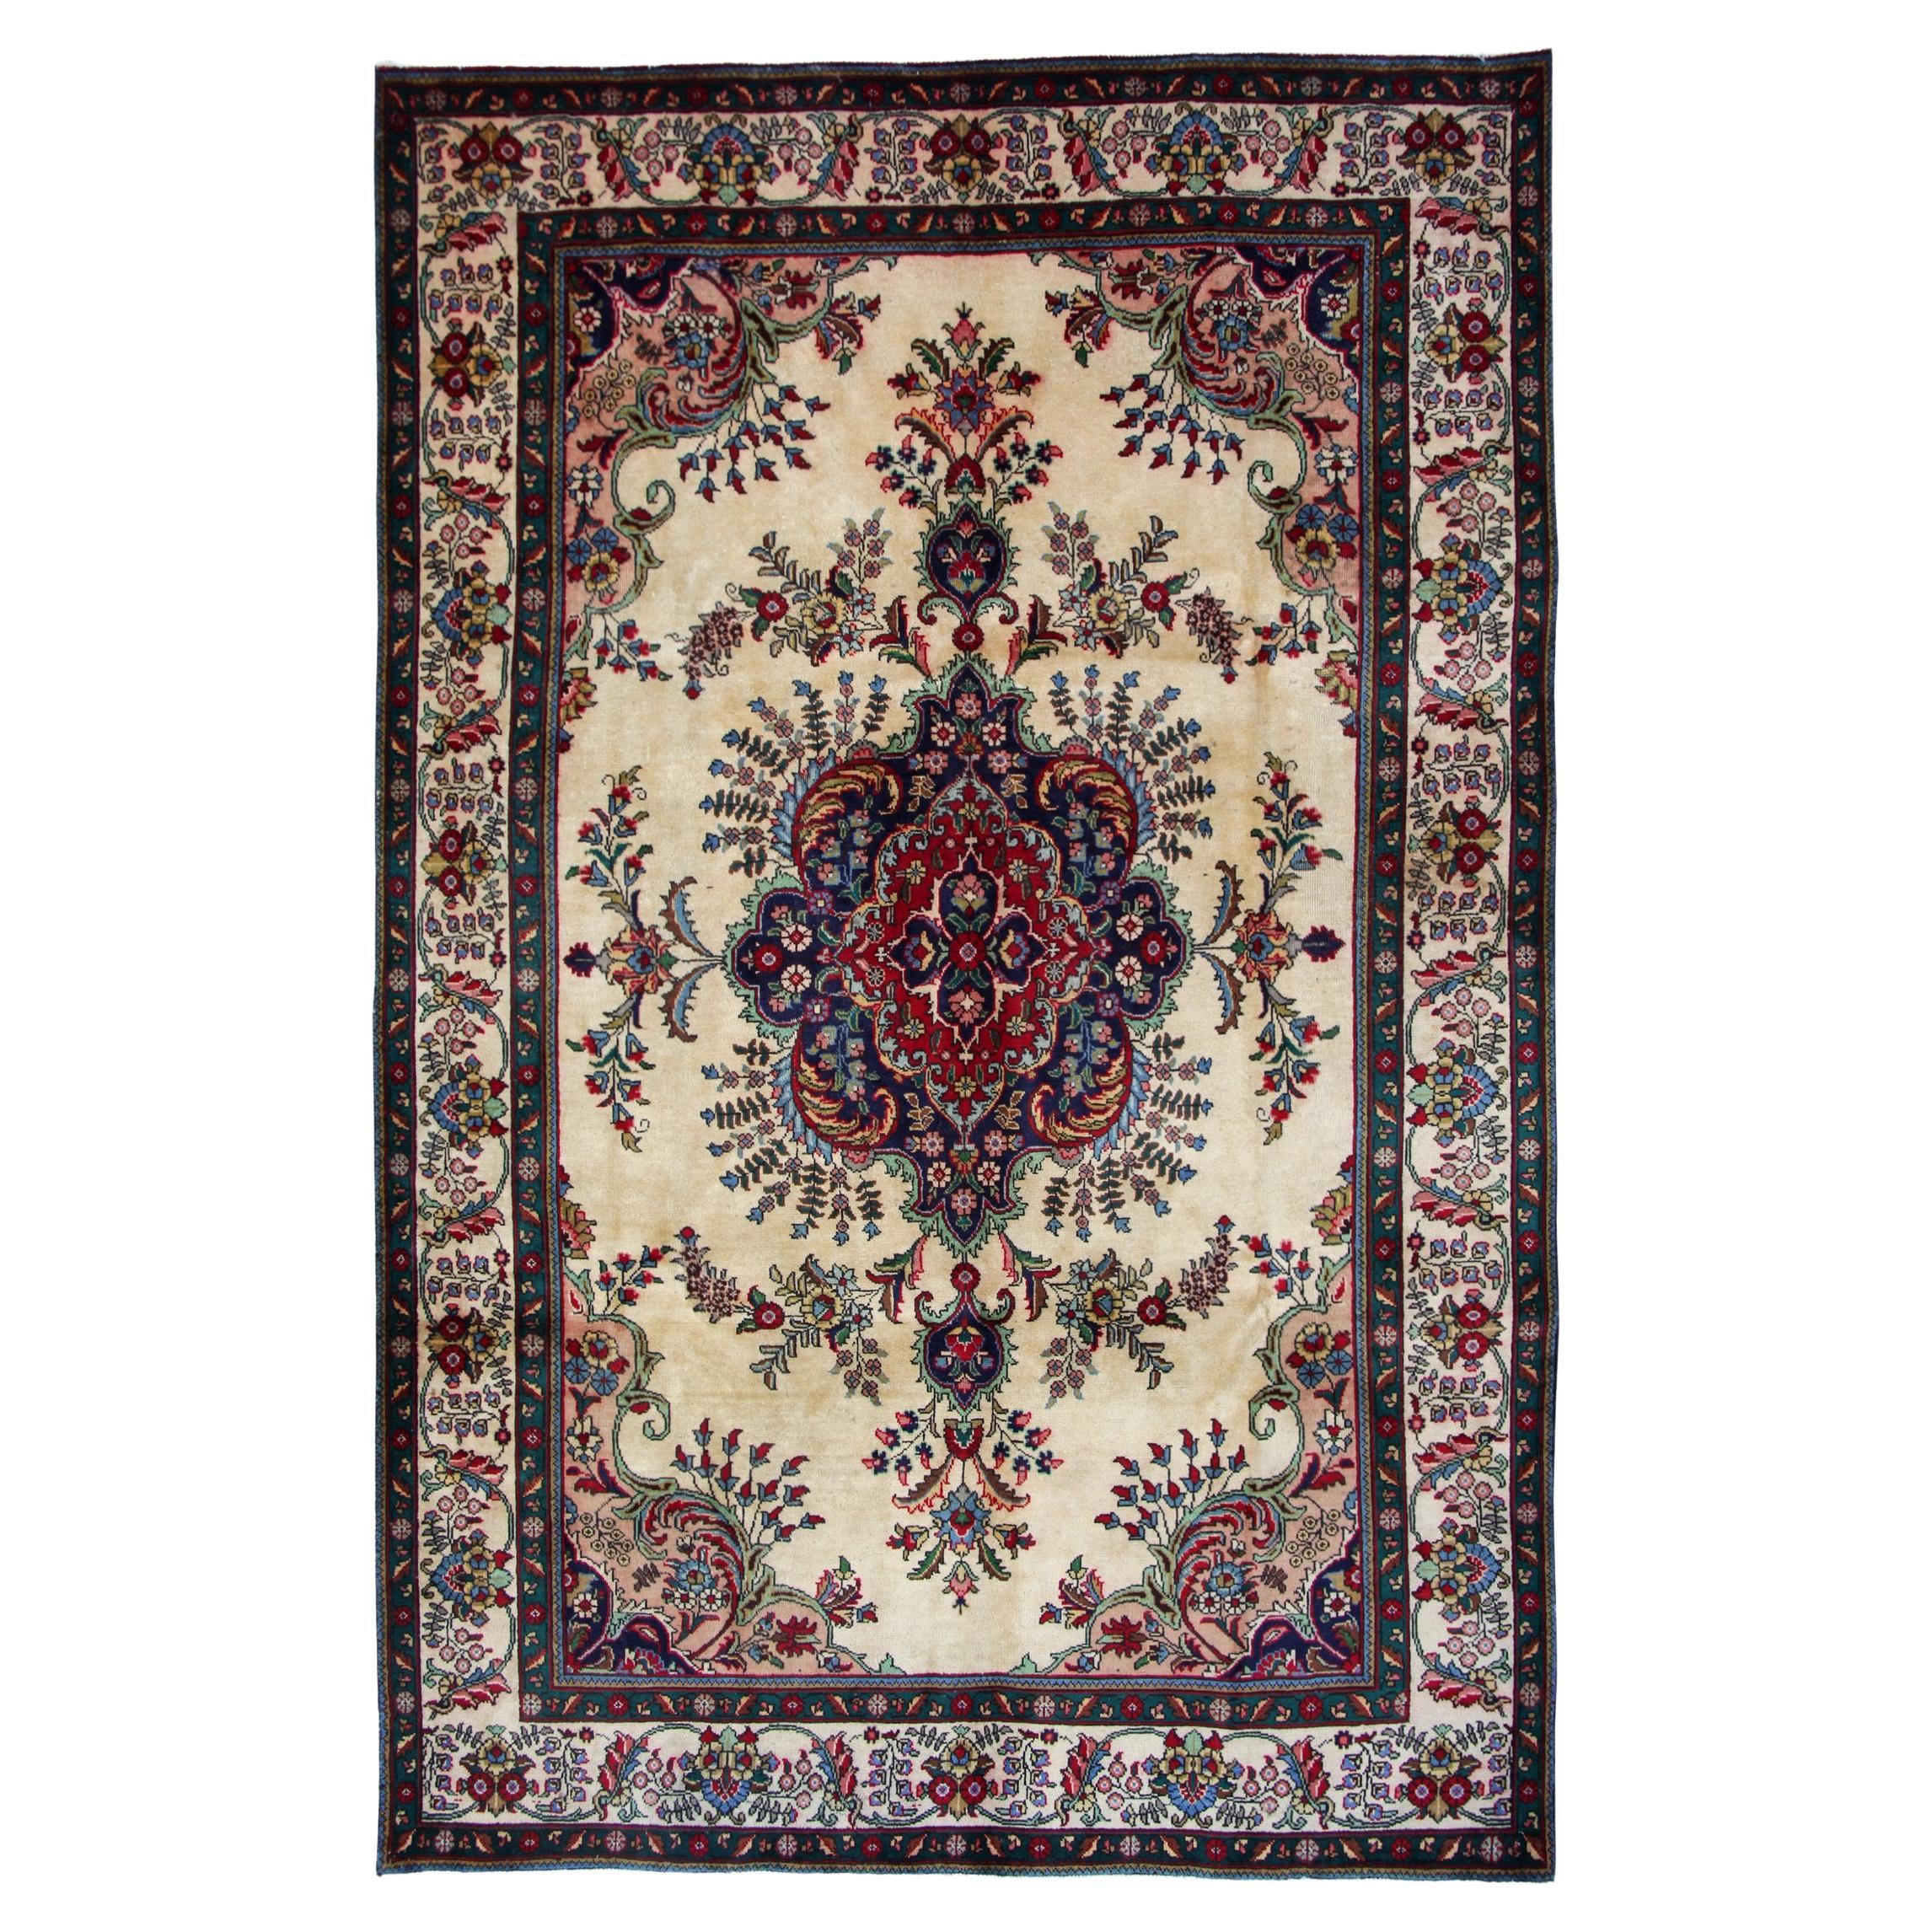 Large Cream Carpet Wool Area Rug, Traditional Floral Living Room Rug